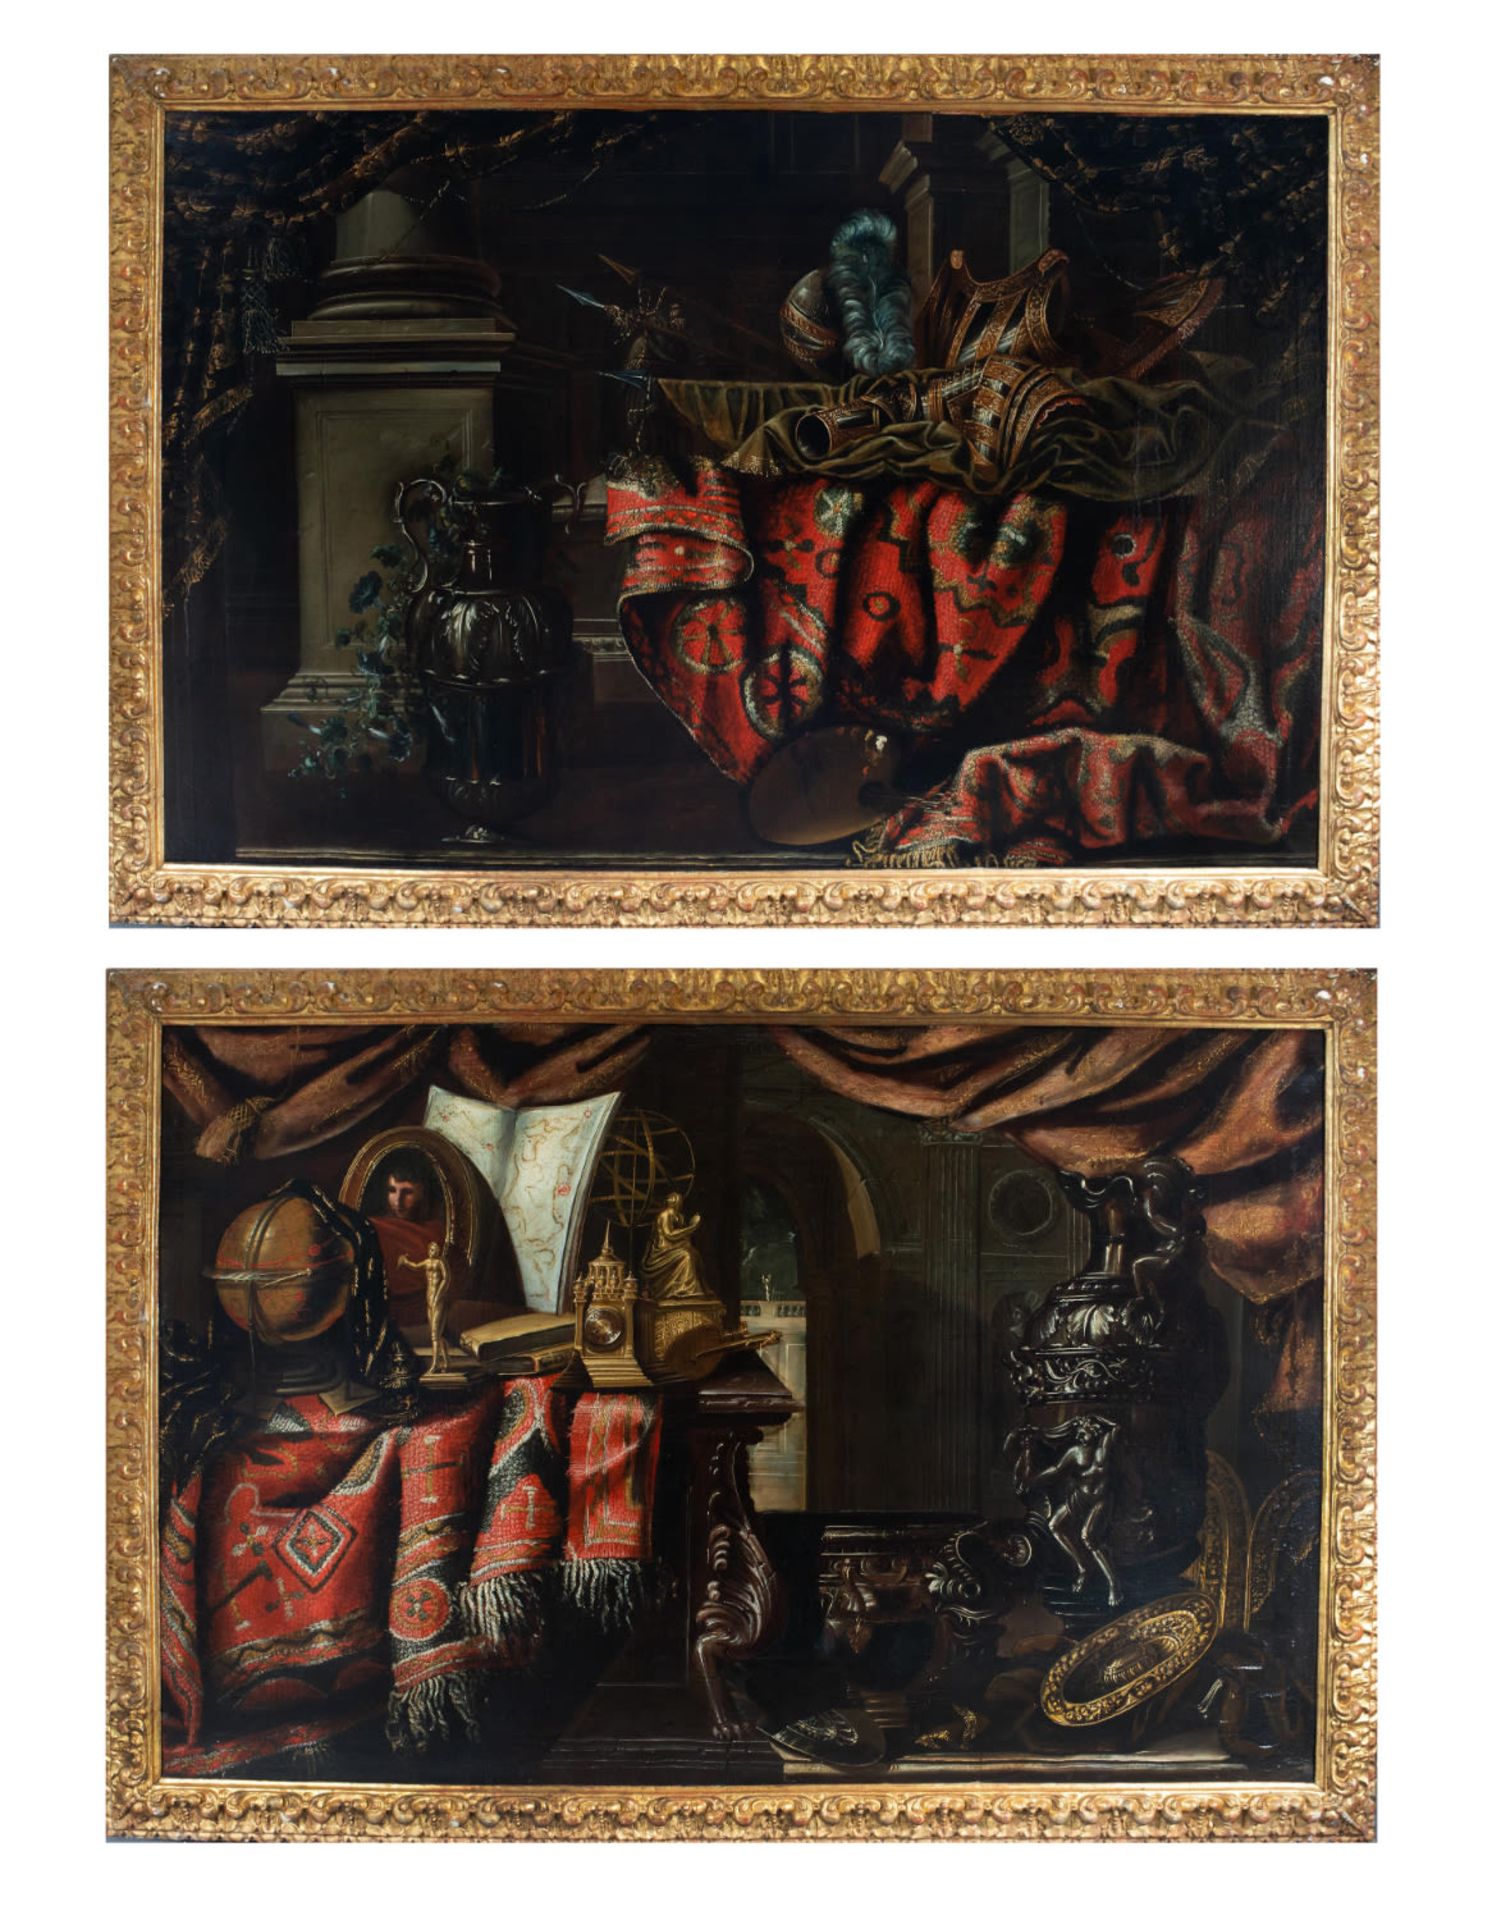 FRANCESCO NOLETTI, CALLED IL MALTESE (VALLETTA C. 1611 - ROME, 1654), LARGE PAIR OF STILL LIFES WITH